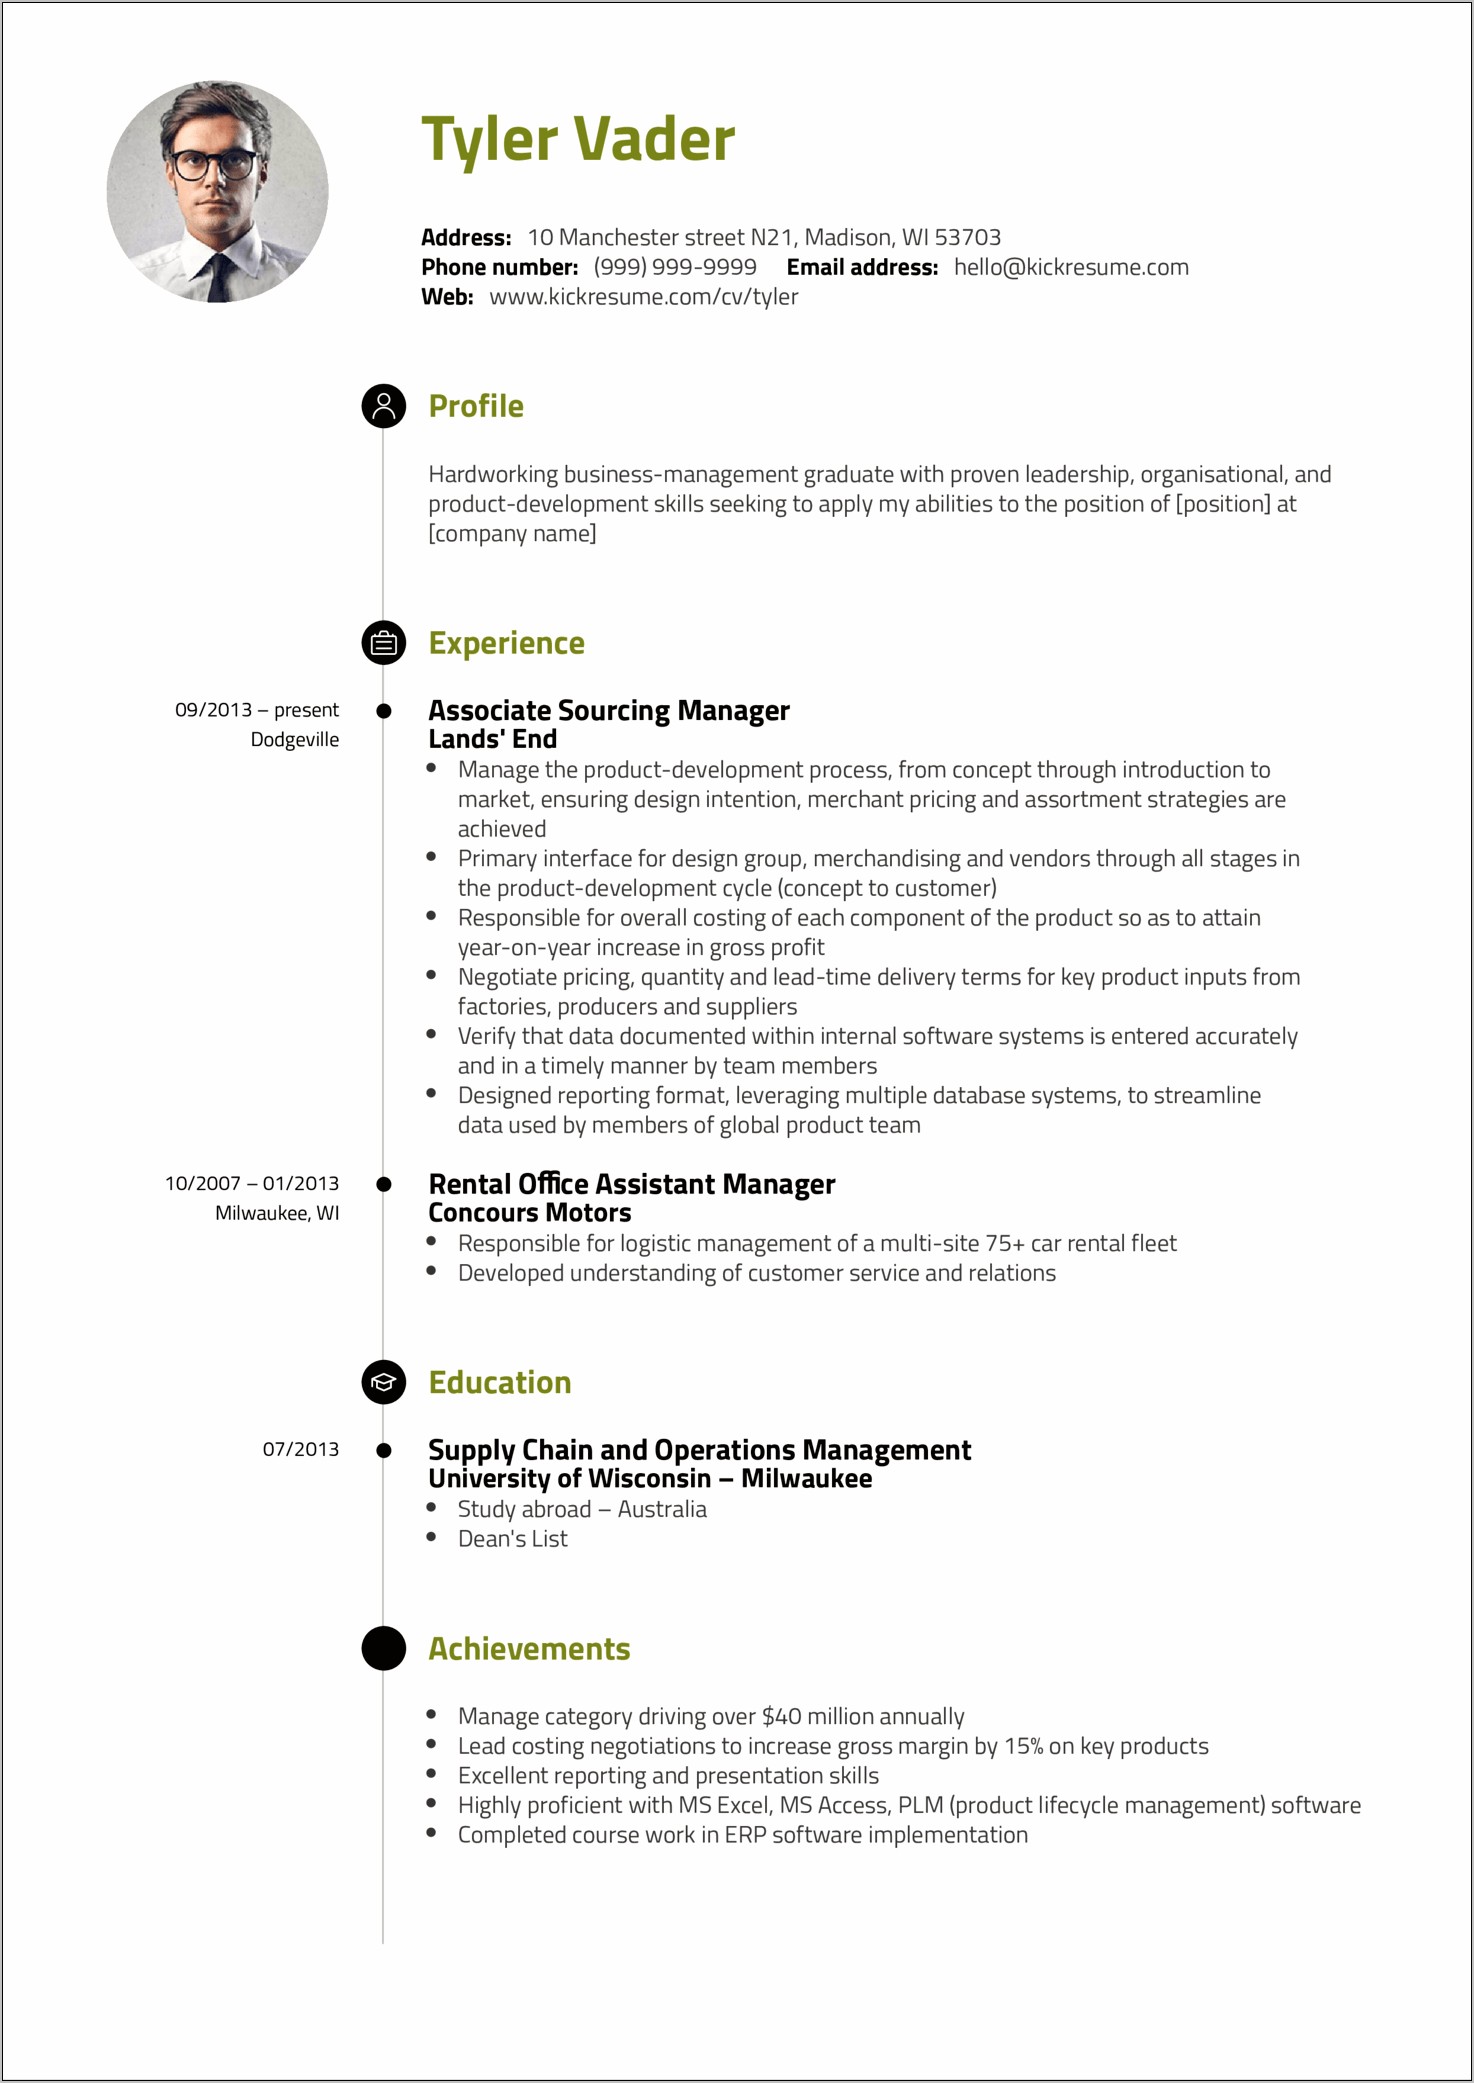 Best Professional Summary For Resume Low Experience